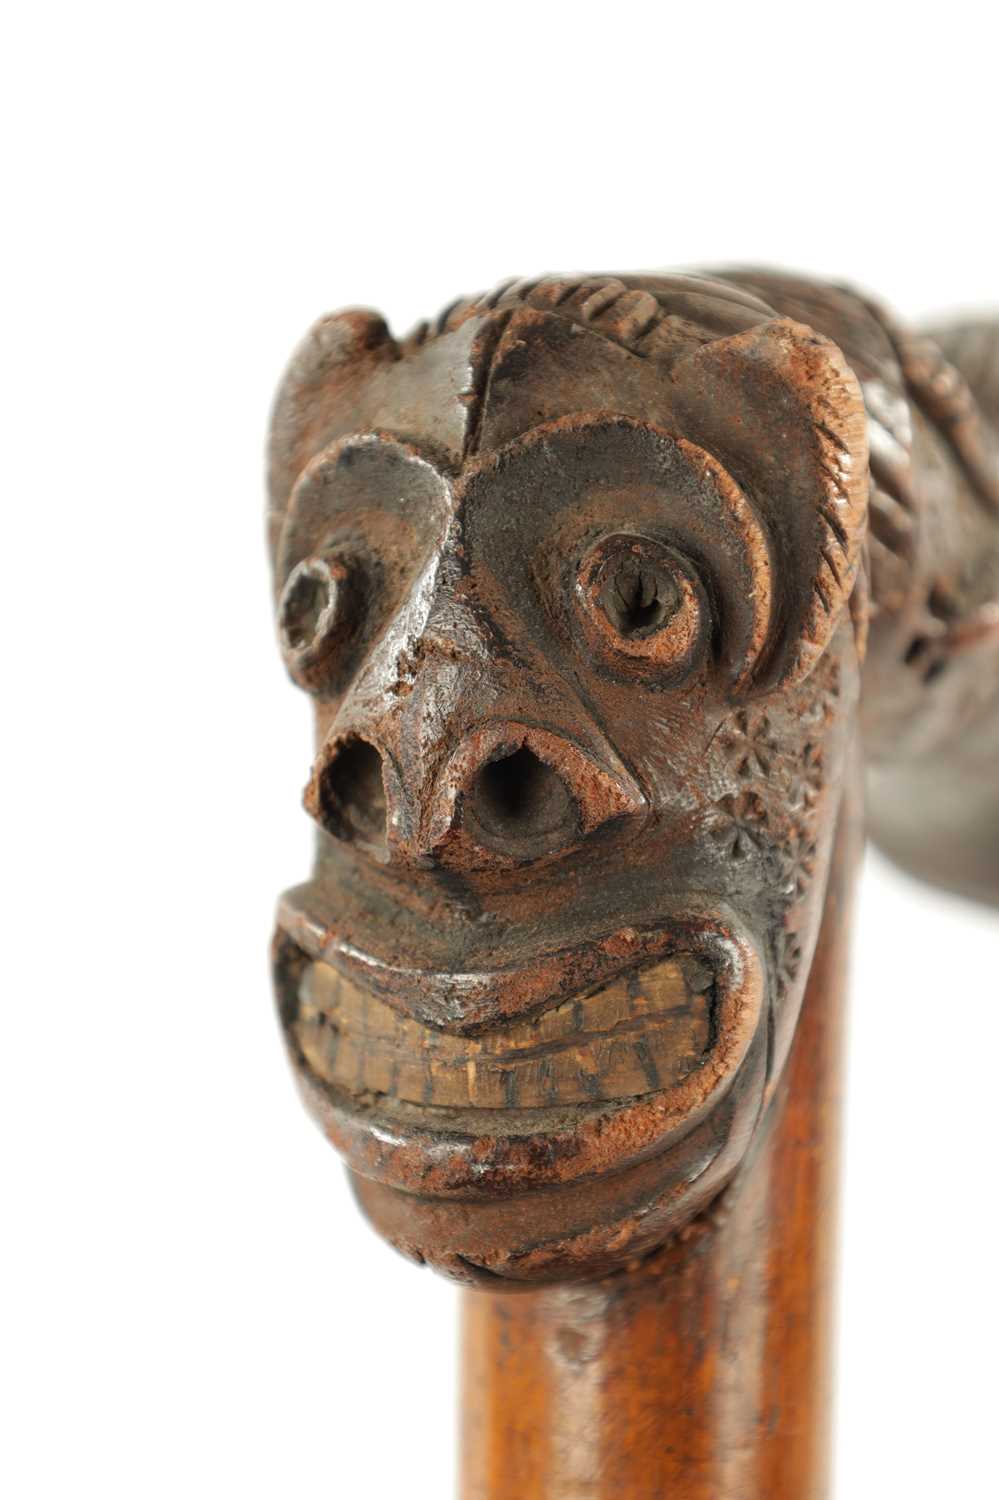 A RARE TWO HEADED GROTESQUE 19TH CENTURY AFRICAN WALKING STICK - Image 2 of 8